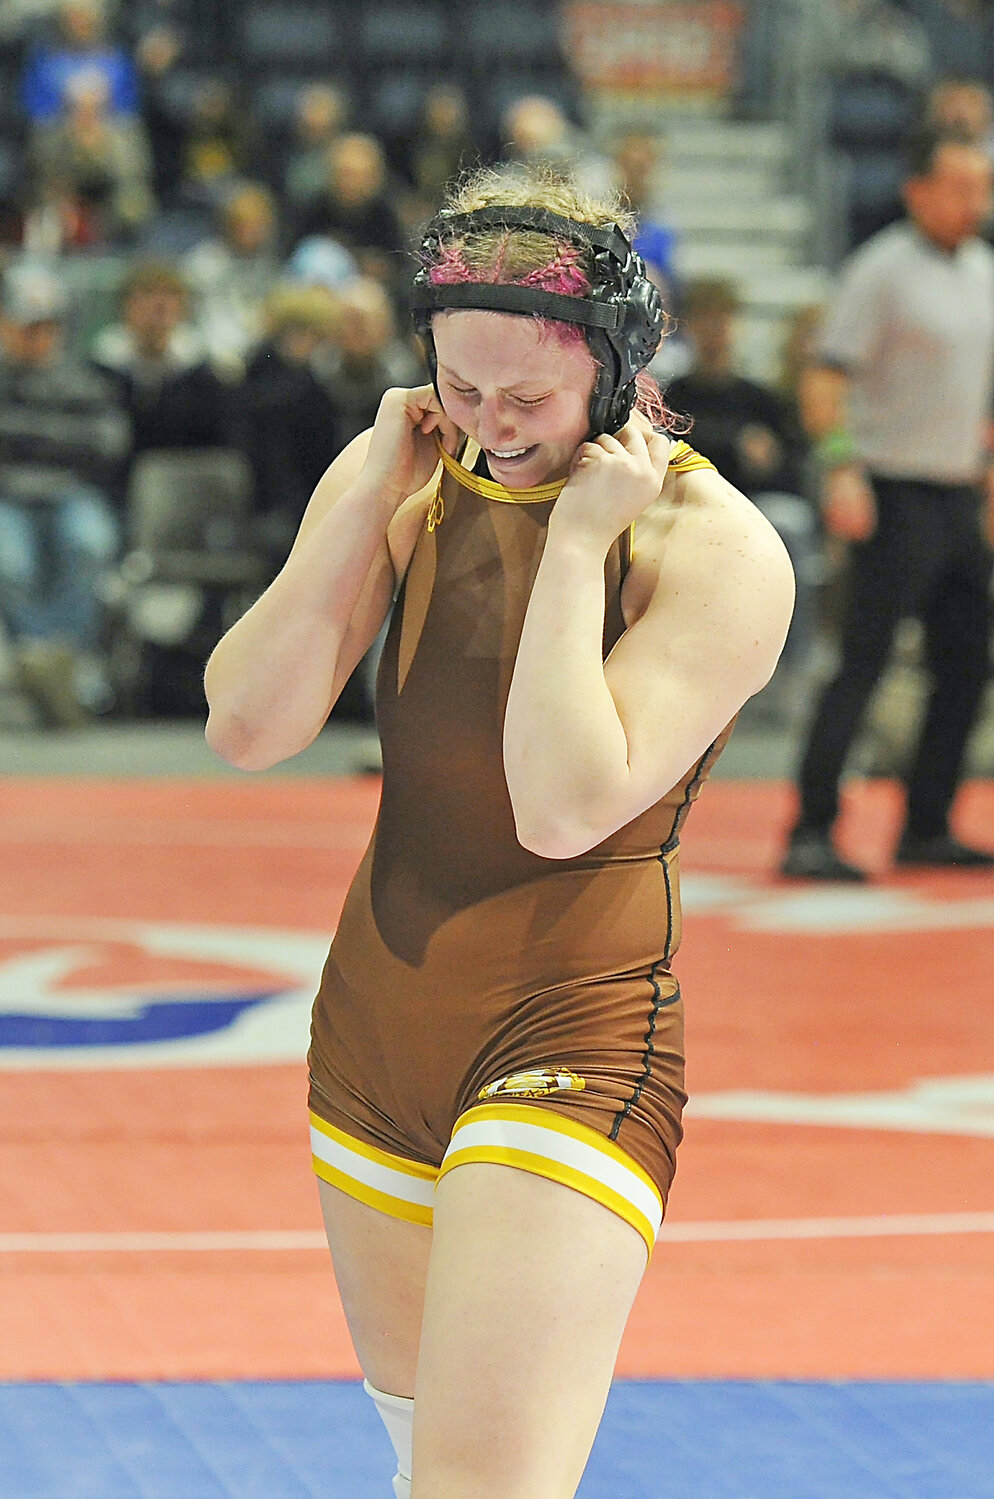 Senior Josie Houk moments after winning the state title at 155 pounds.